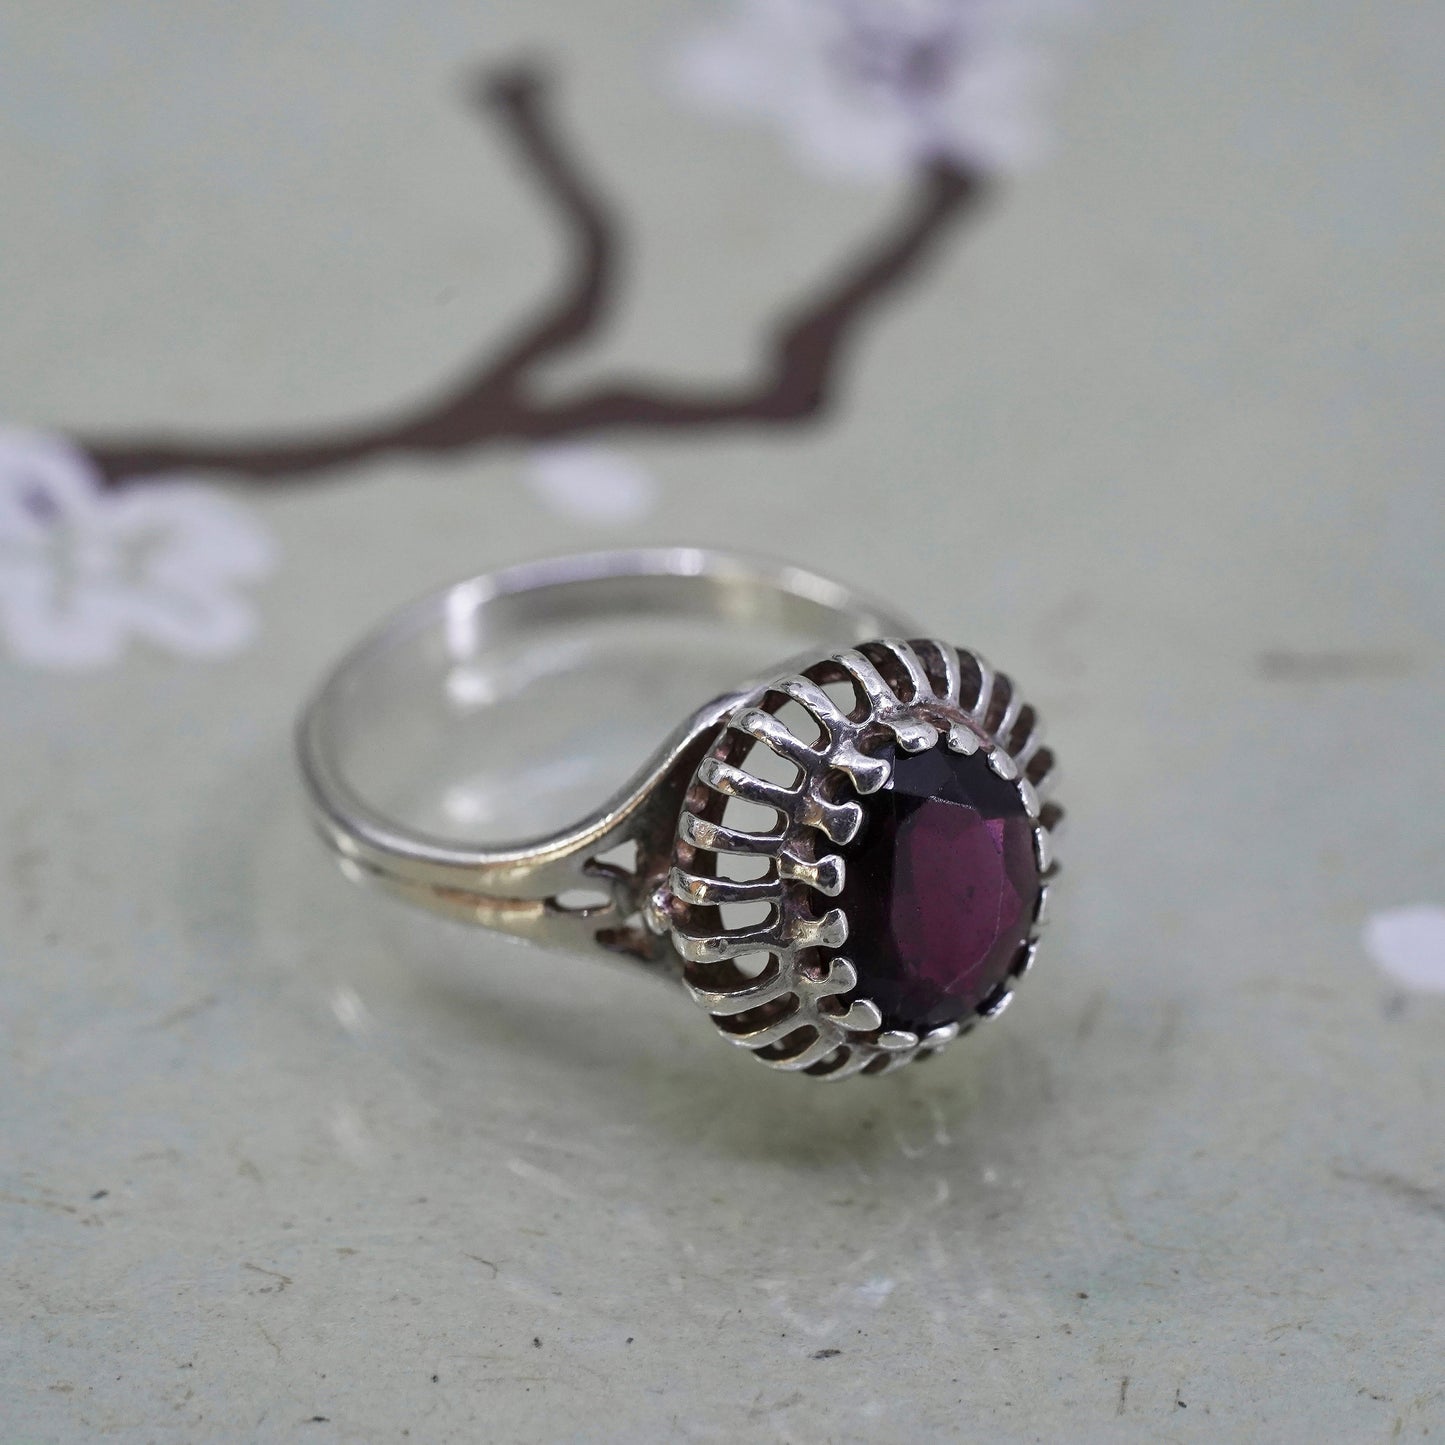 Size 7, Vintage sterling 925 silver handmade ring with oval garnet